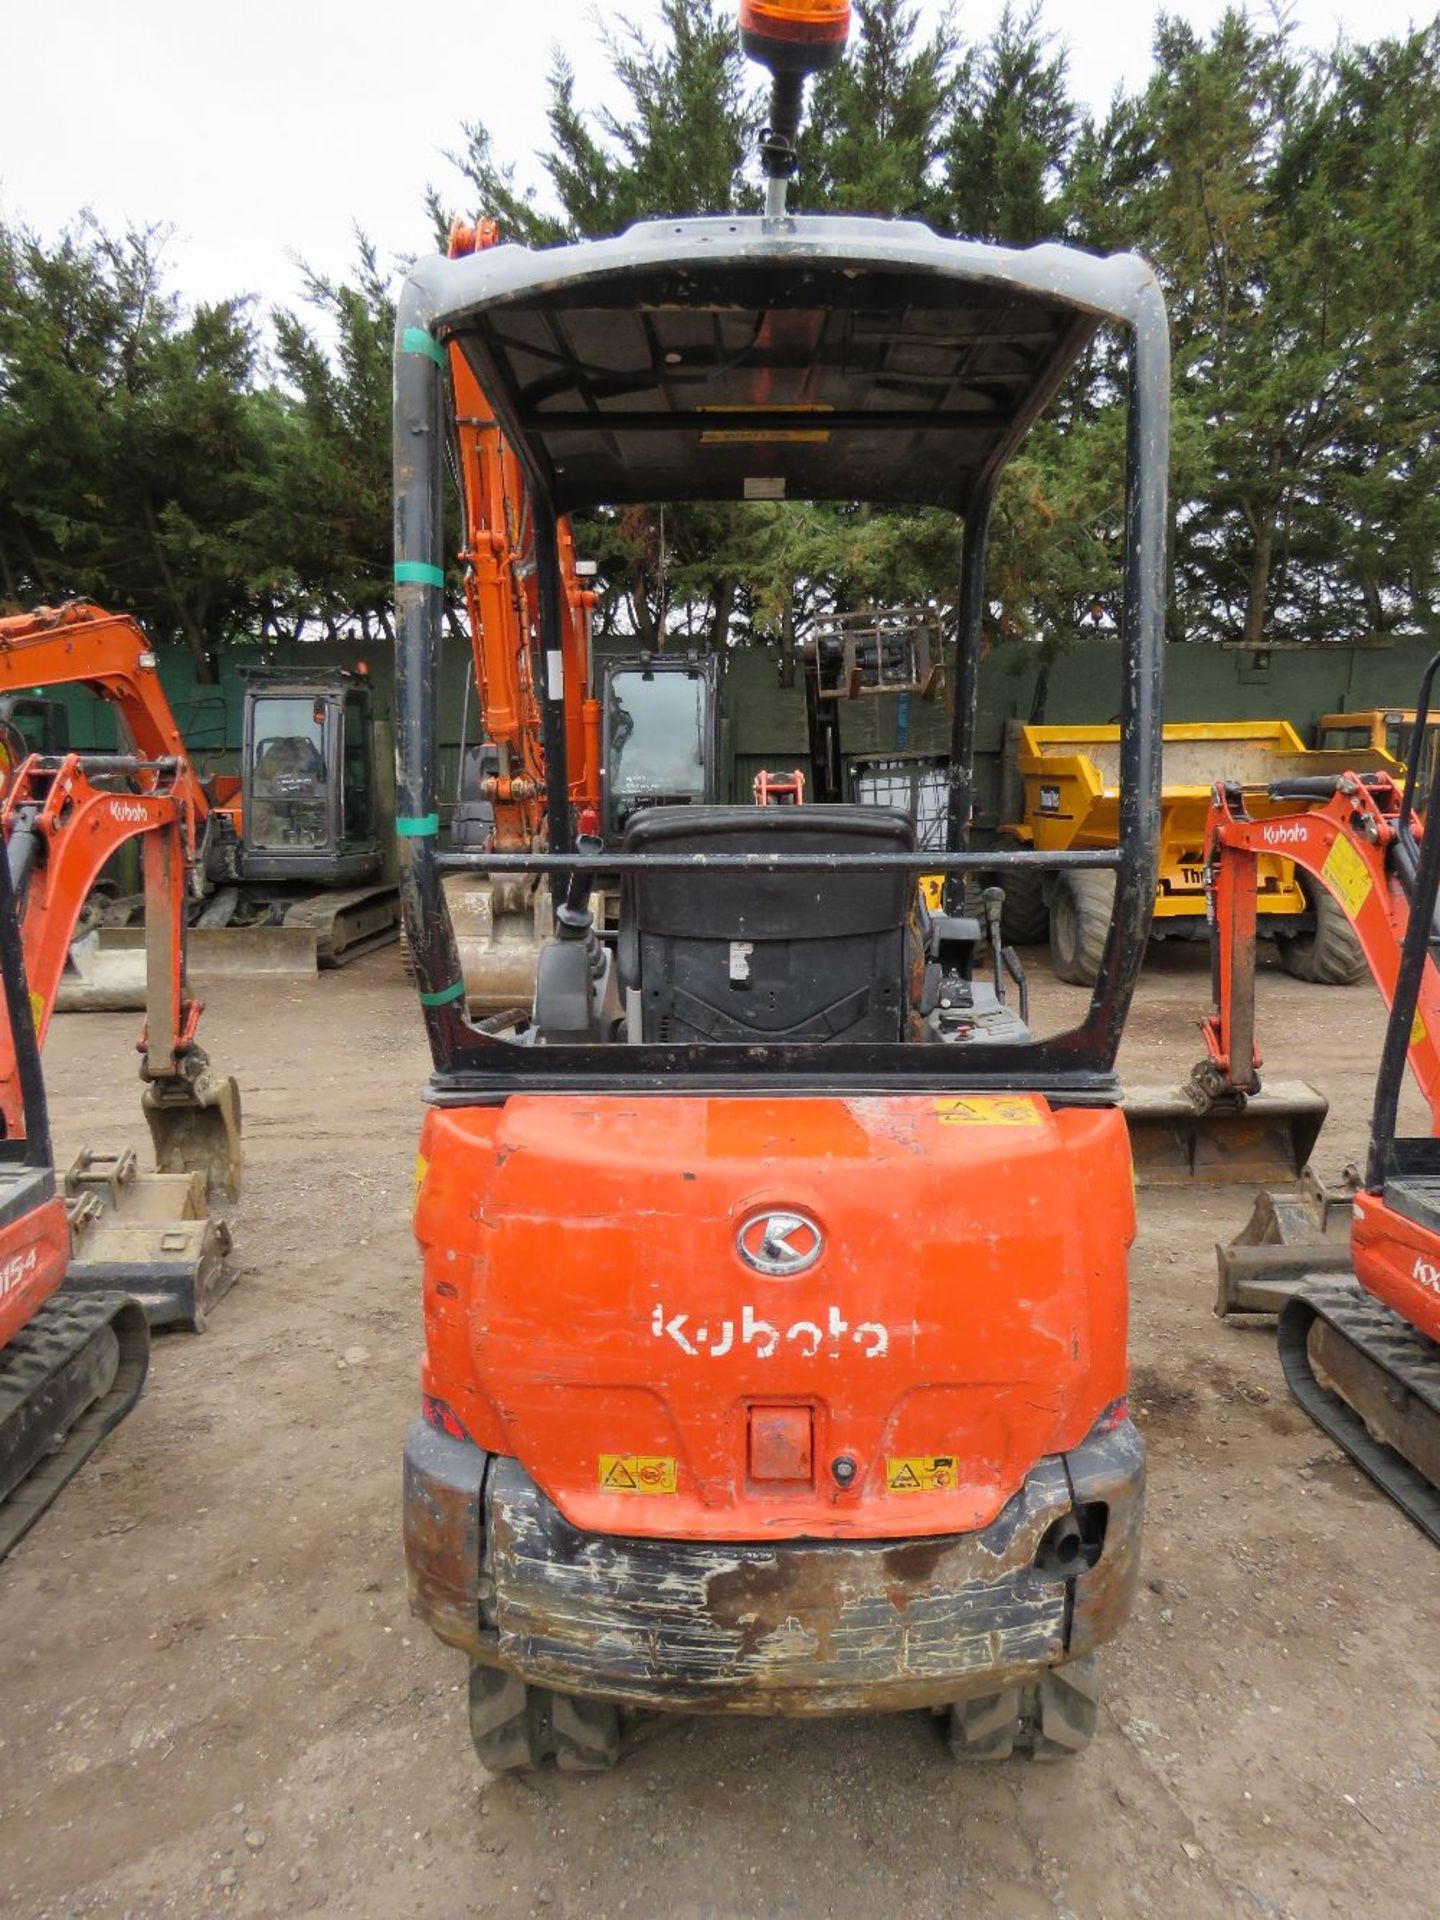 KUBOTA KX015-4 1.5TONNE MINI DIGGER, YEAR 2015 BUILD. SUPPLIED WITH 3 X BUCKETS AS SHOWN, QUICK - Image 4 of 11